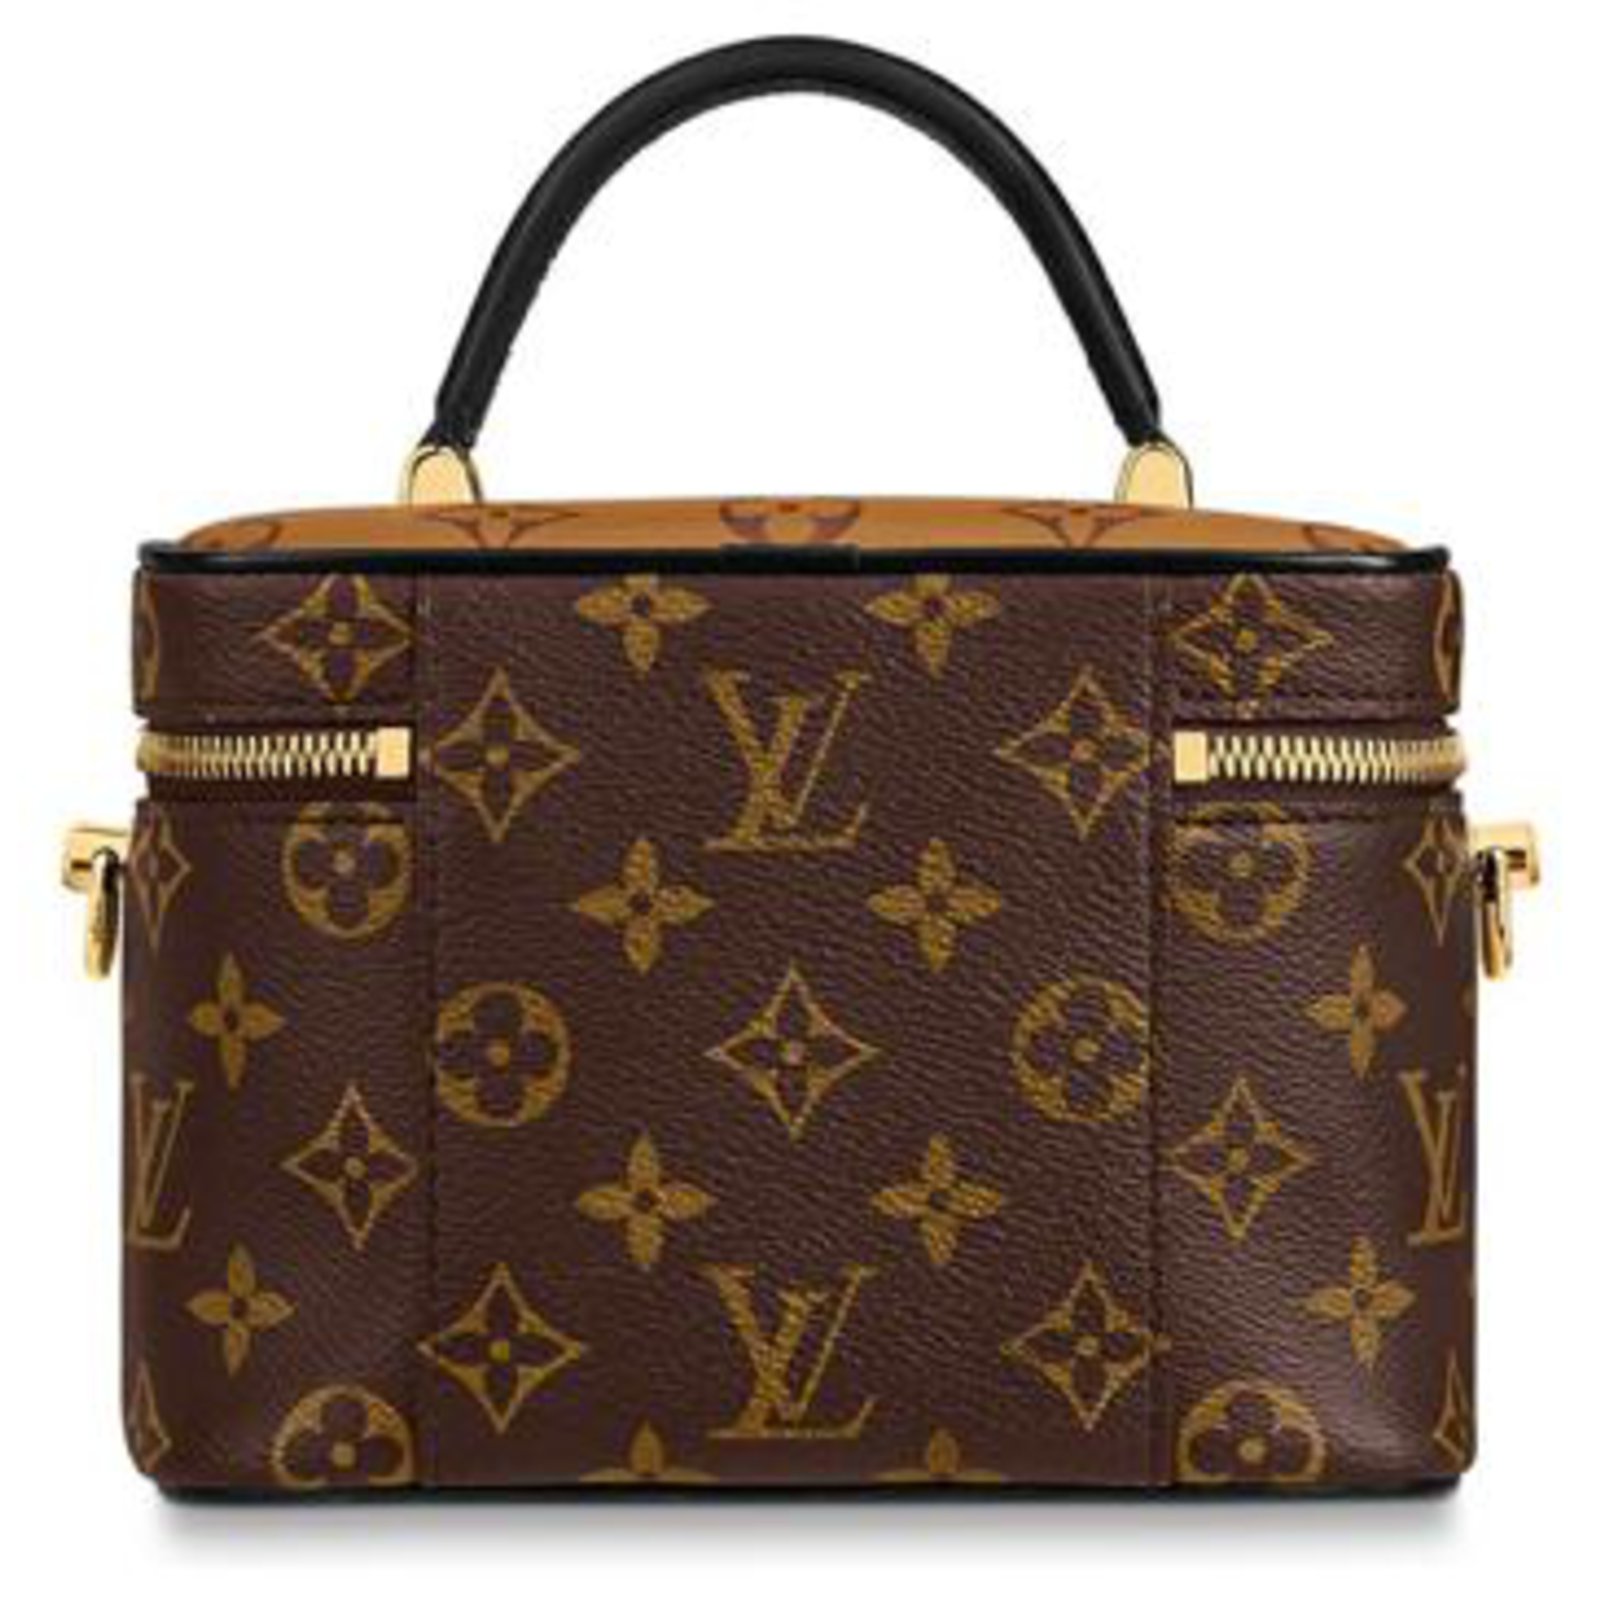 Premium High End Version of Purse Organizer Specially for LV Vanity PM, Brown